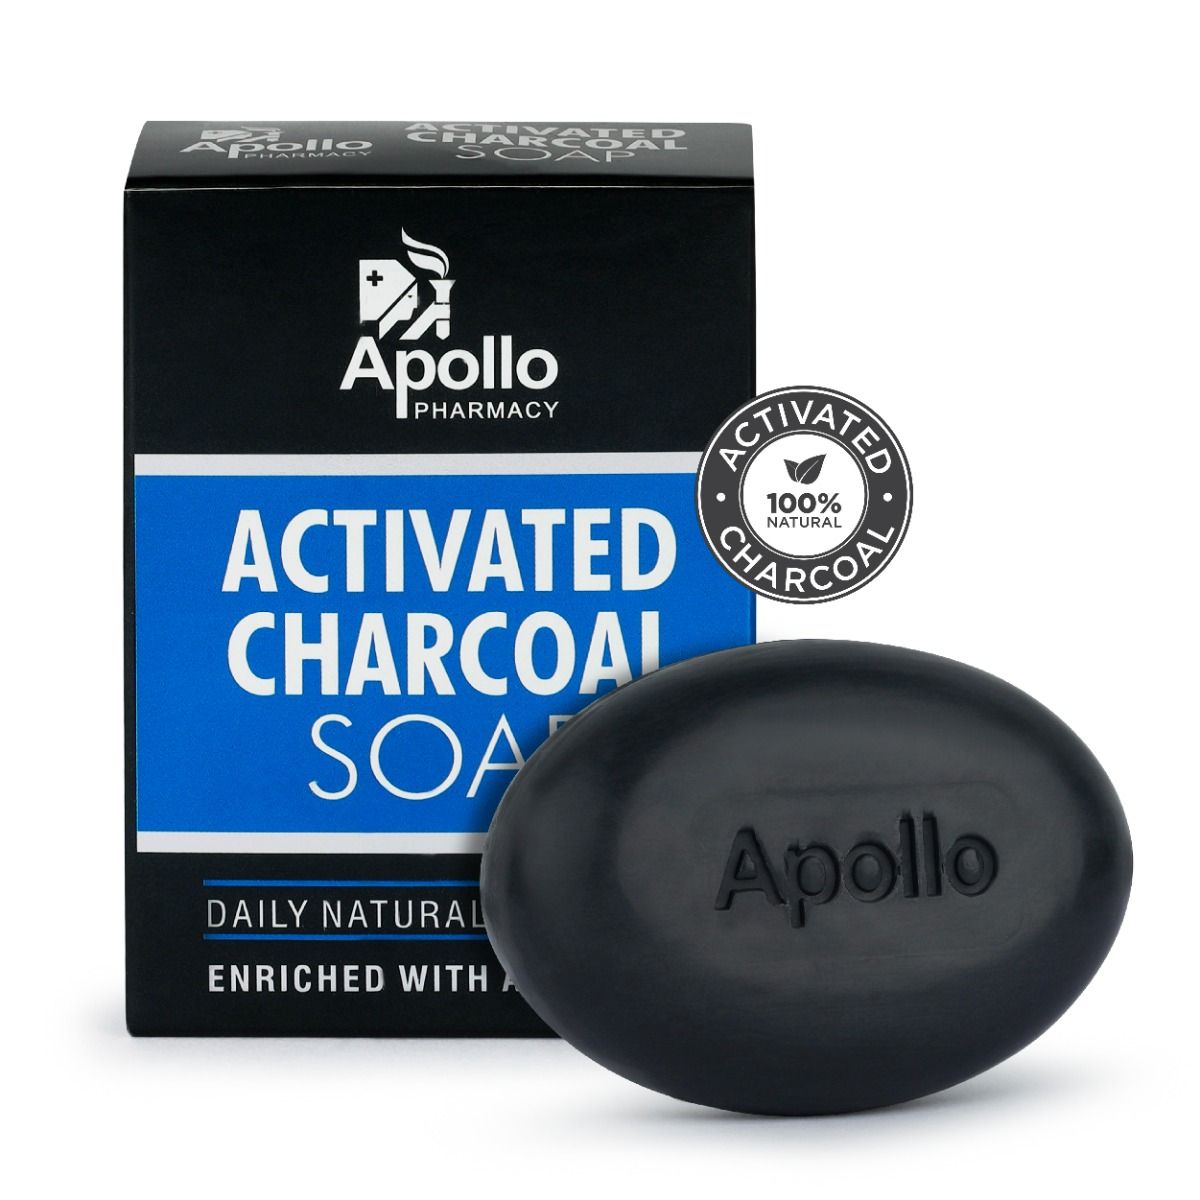 Apollo Pharmacy Activated Charcoal Soap, 250 gm (2x125 gm), Pack of 2 S